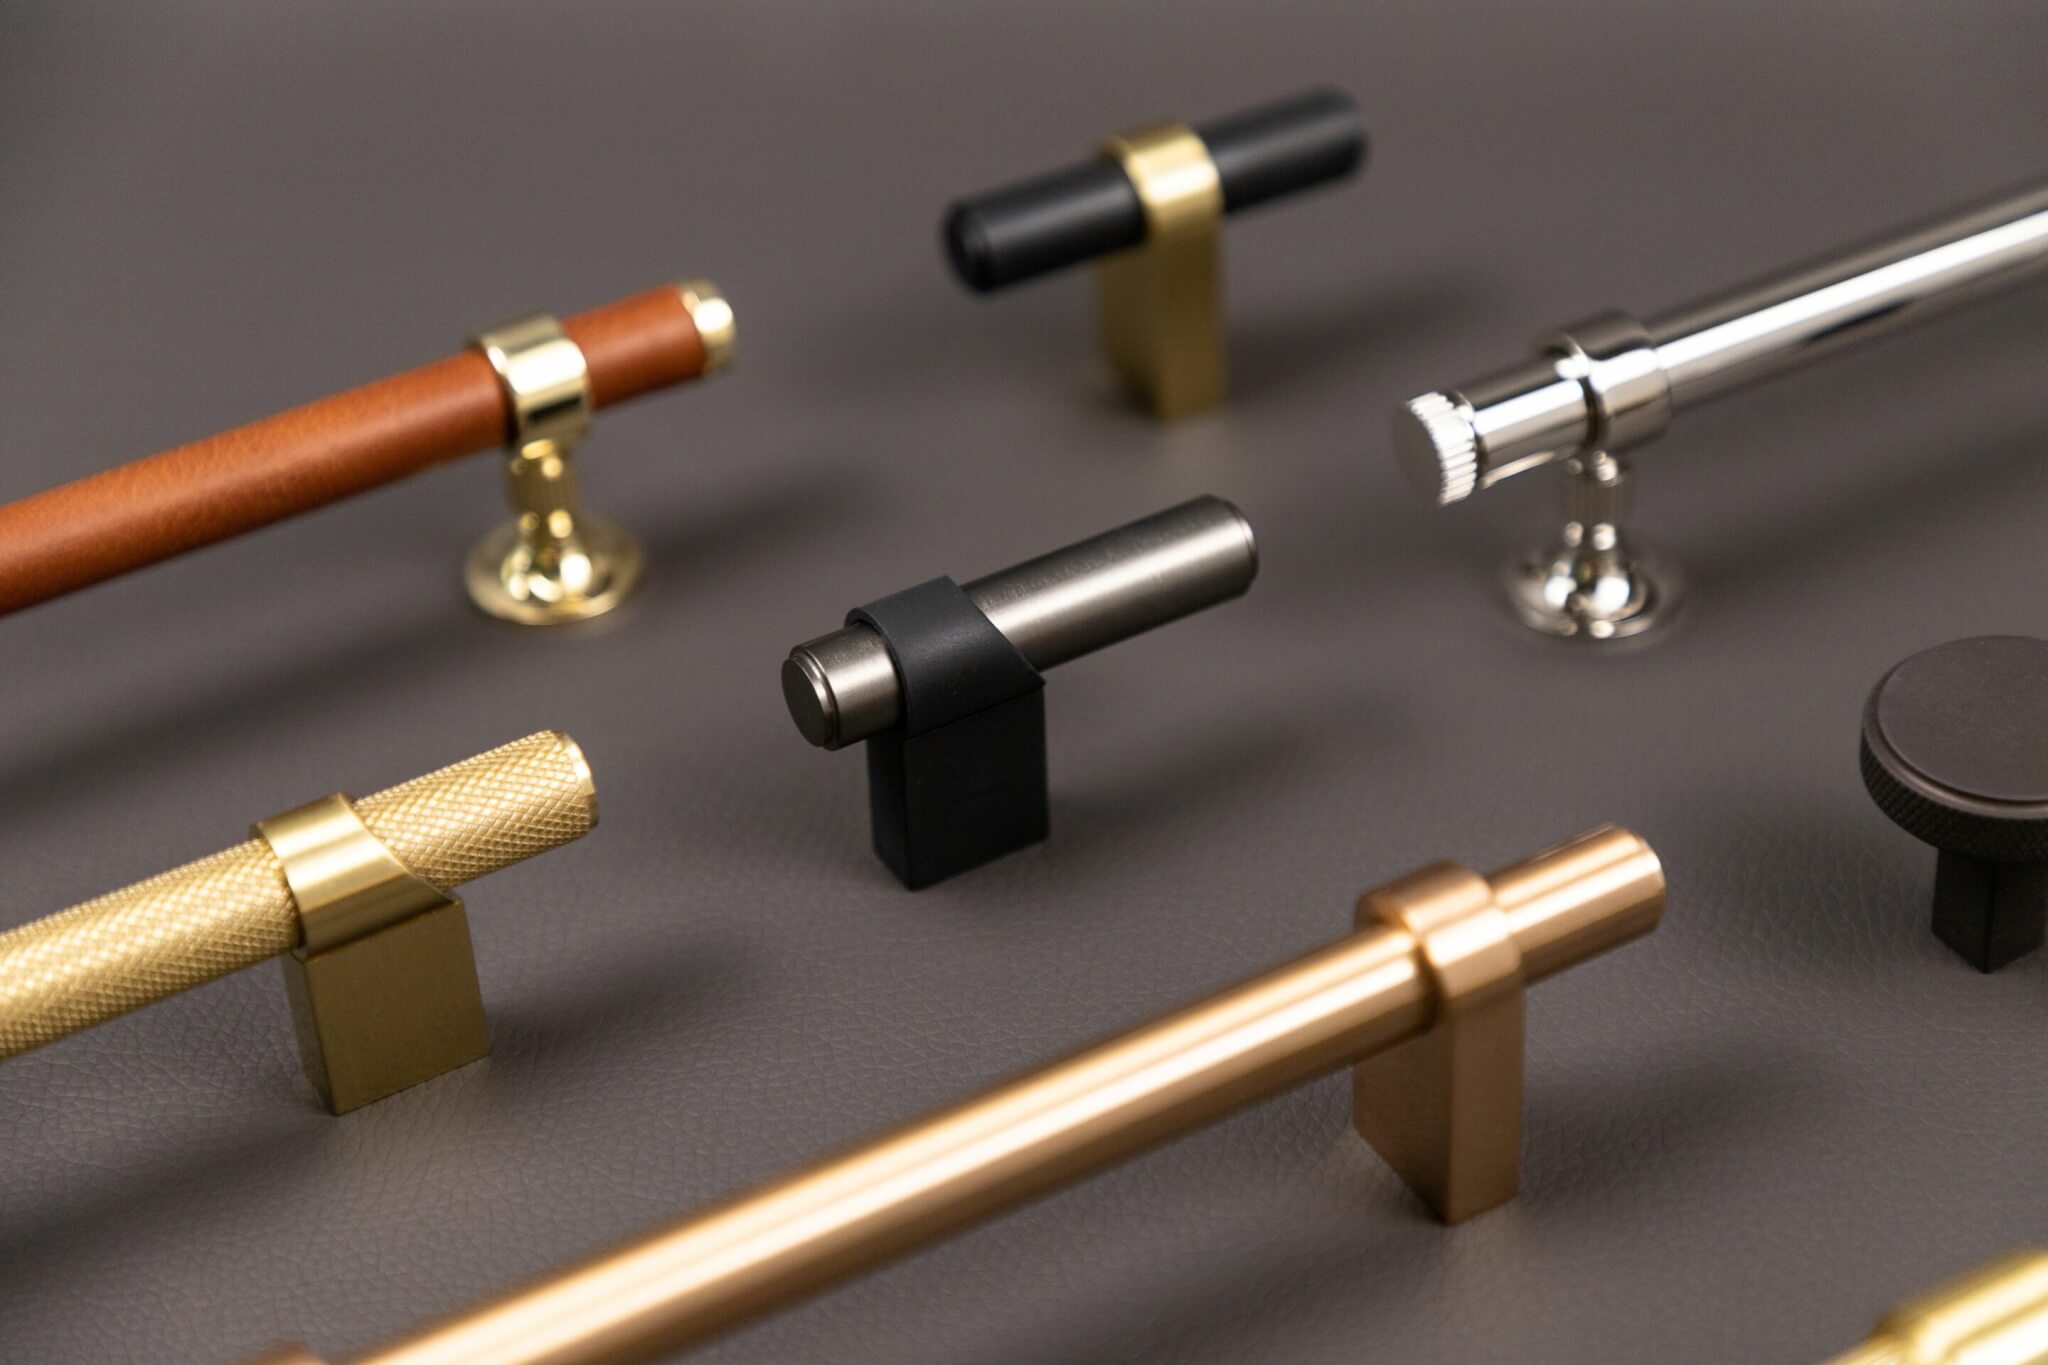 Decorative hardware in various colors